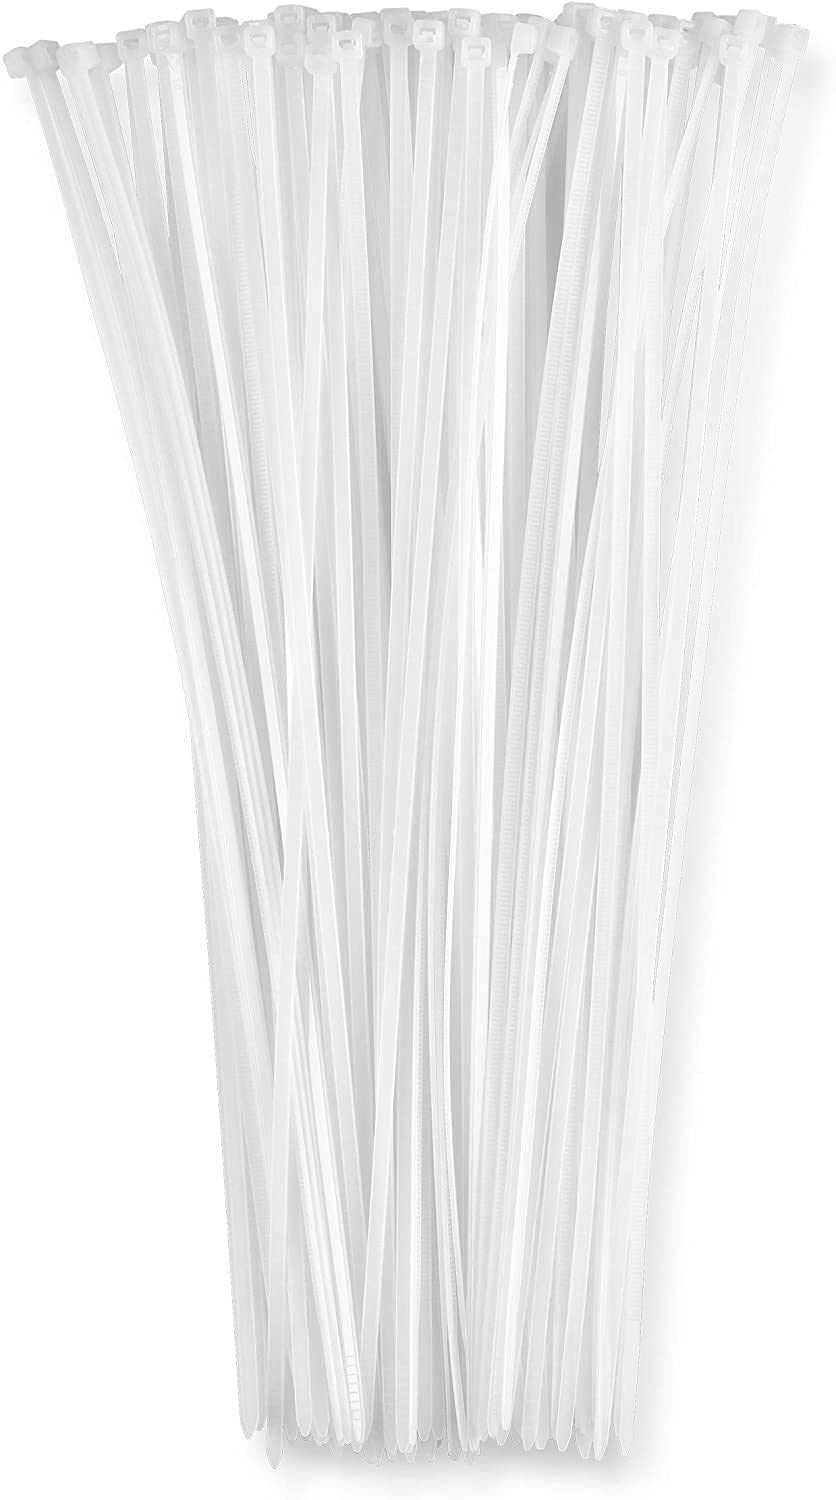 12 Inch Zip Cable Ties (100 Pack), 50lbs Tensile Strength - Heavy Duty White, Self-Locking Premium Nylon Cable Wire Ties for Indoor and Outdoor by Bolt Dropper